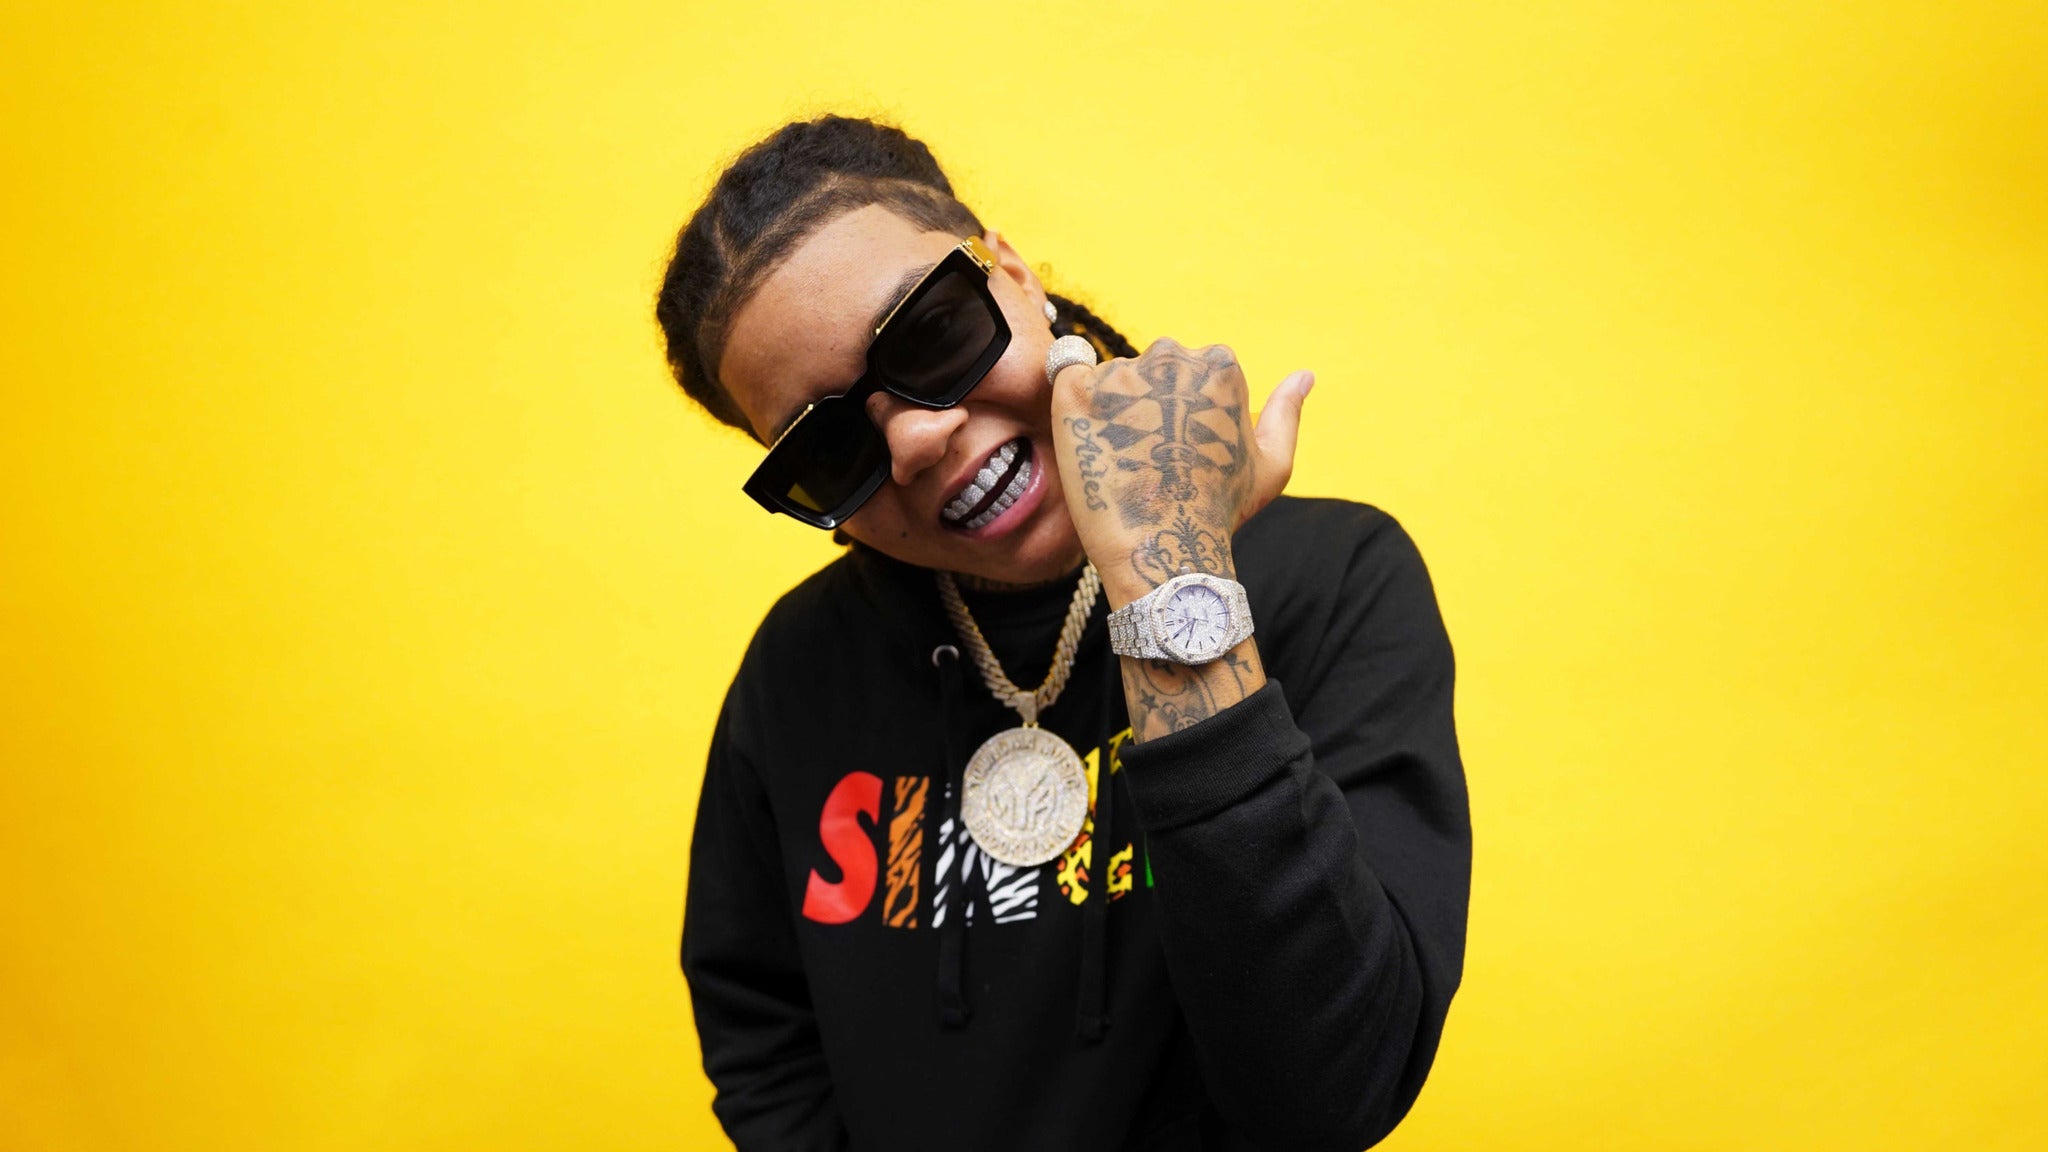 Image used with permission from Ticketmaster | Young M.A. tickets